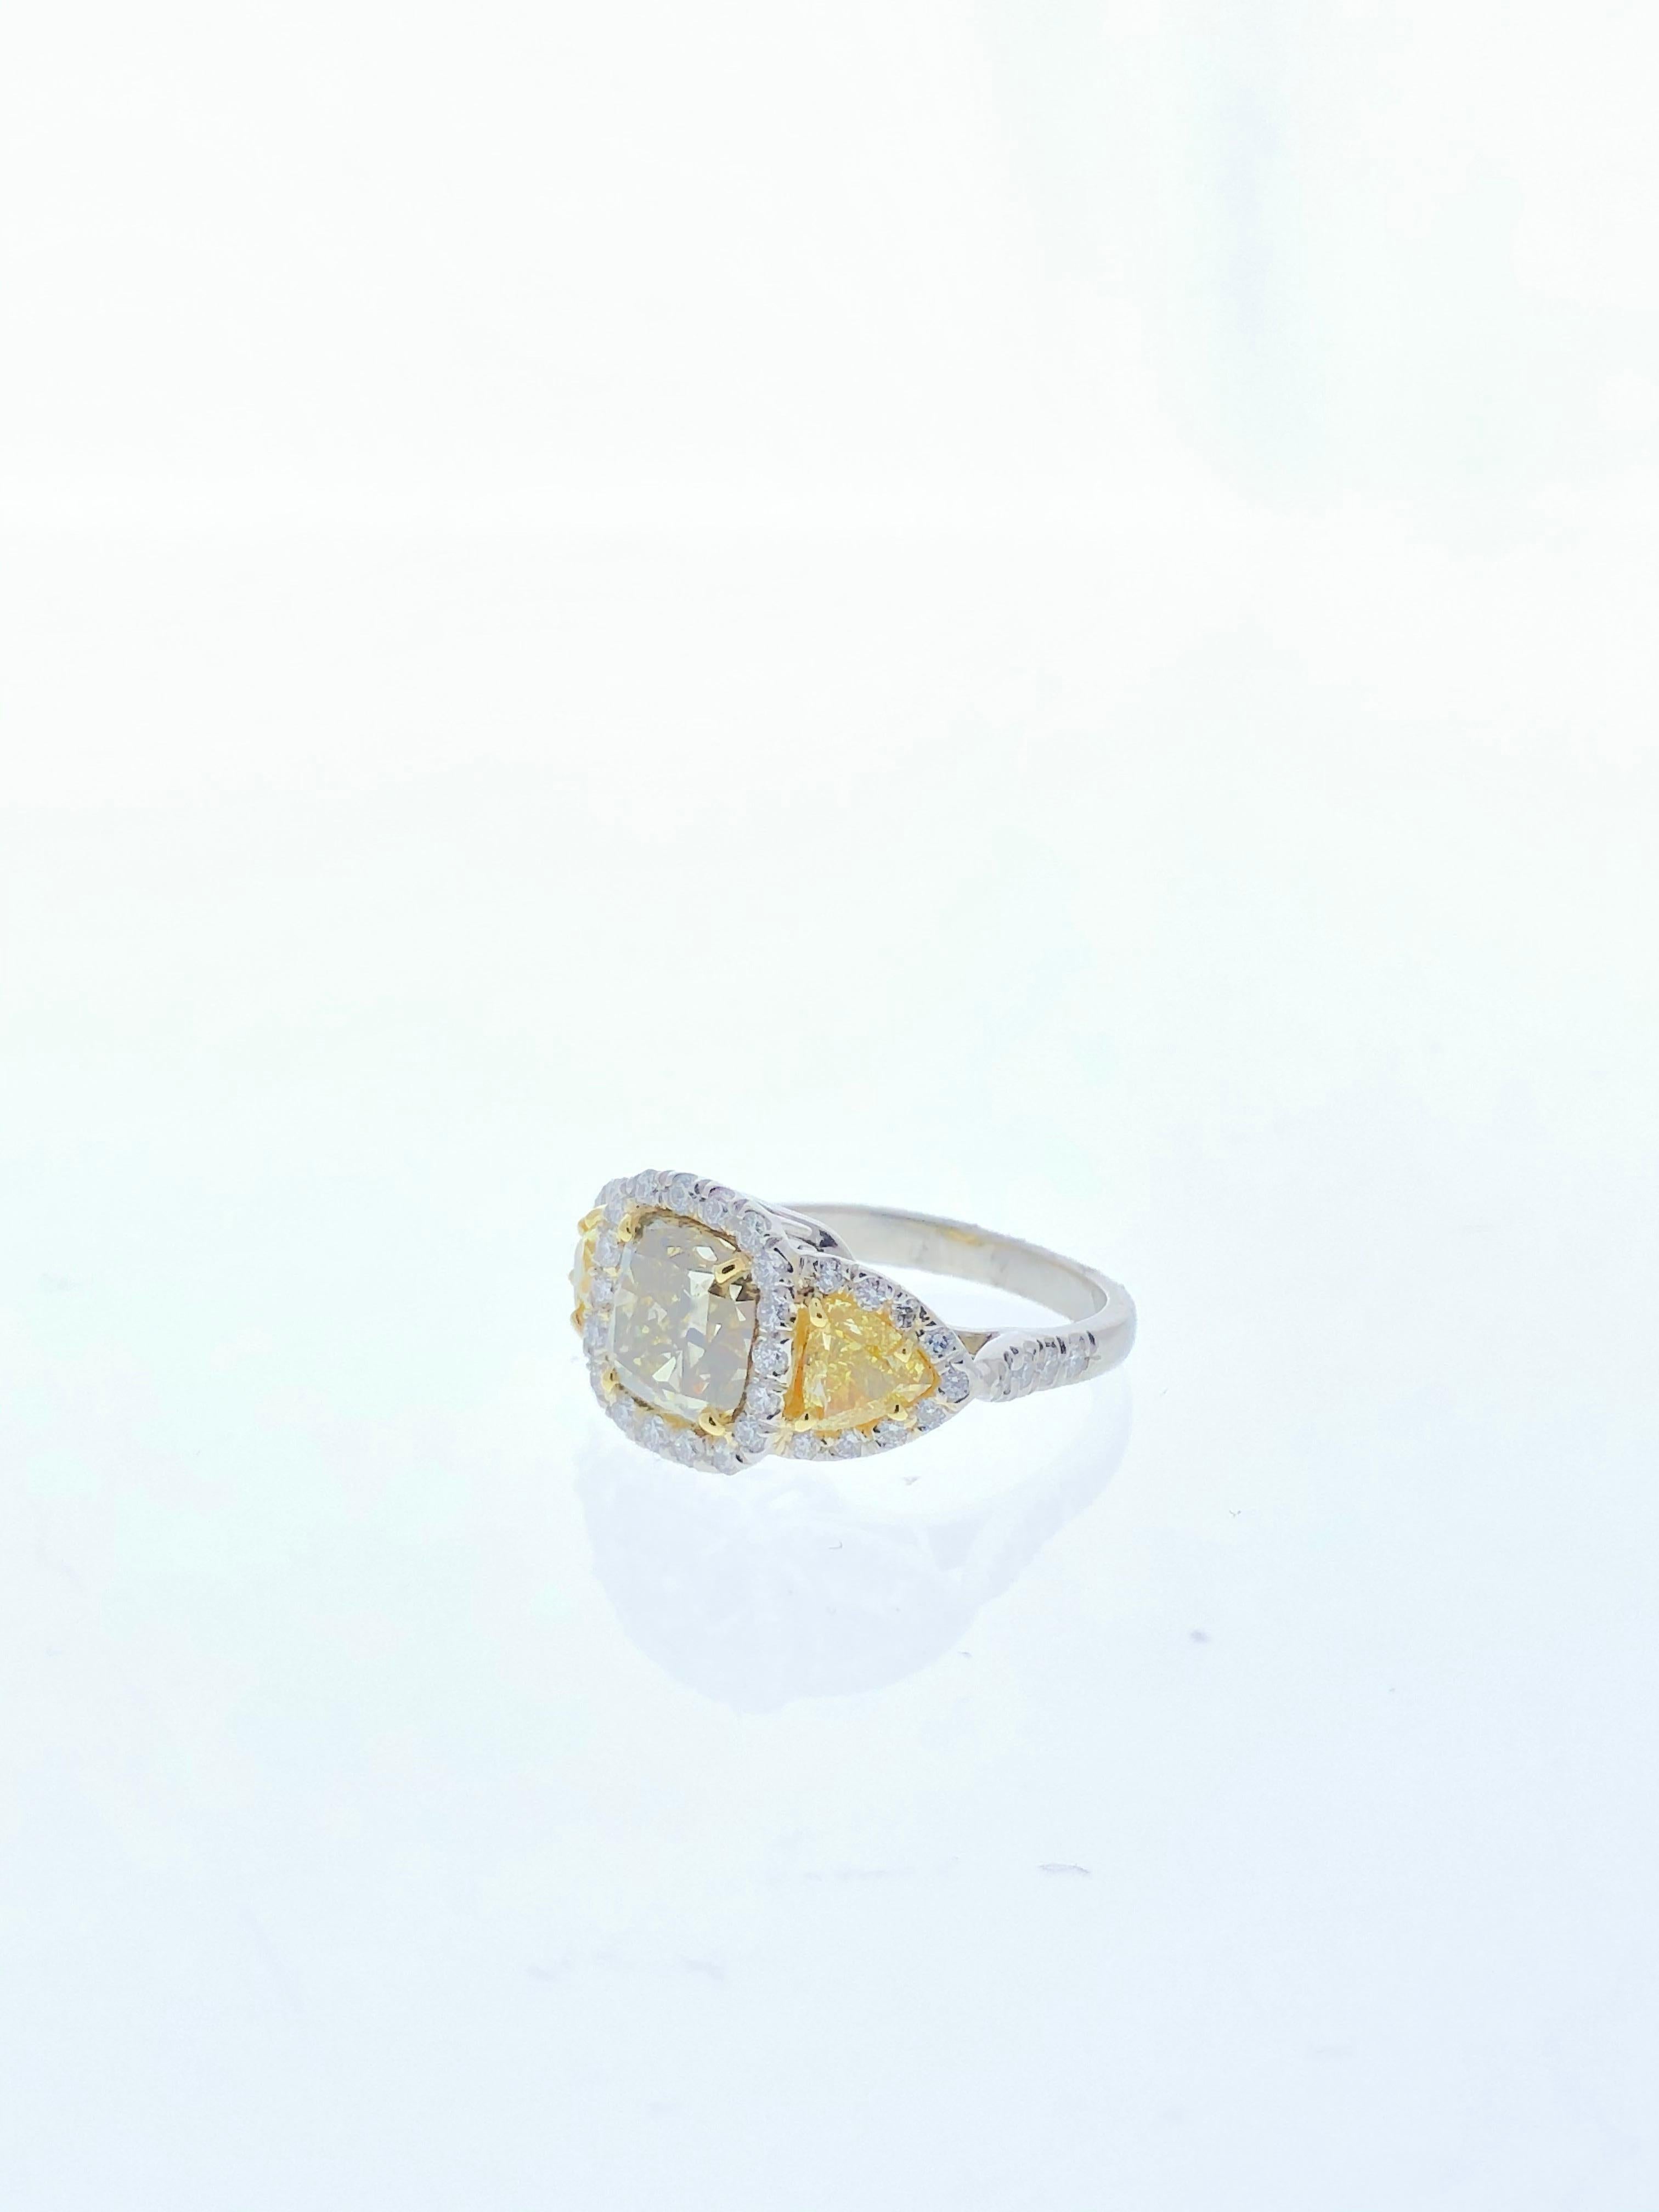 GIA Certified 3.10 Carat Fancy Greenish Yellow Cushion Diamond Ring in Platinum In New Condition For Sale In Chicago, IL